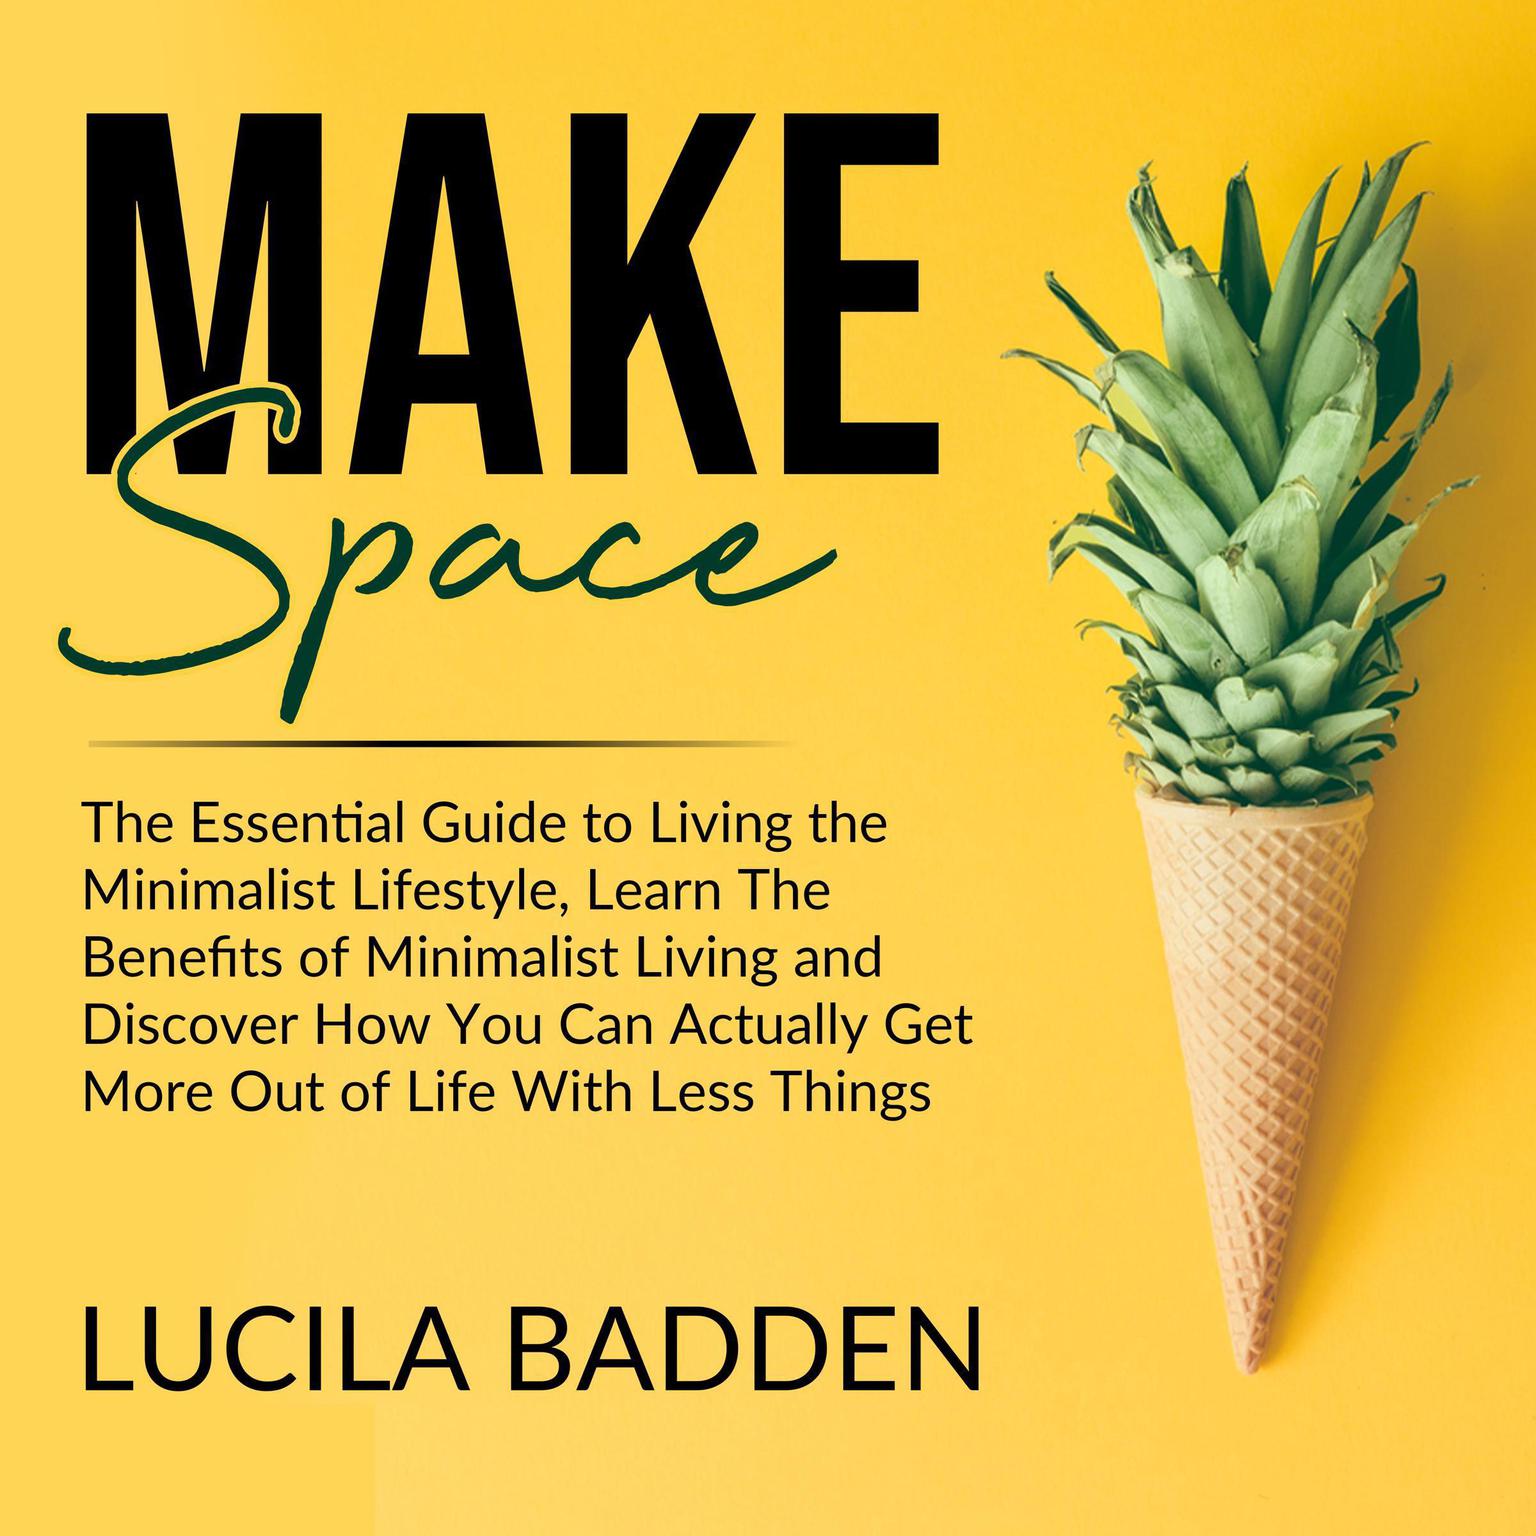 Make Space: The Essential Guide to Living the Minimalist Lifestyle, Learn The Benefits of Minimalist Living and Discover How You Can Actually Get More Out of Life With Less Things Audiobook, by Lucila Badden